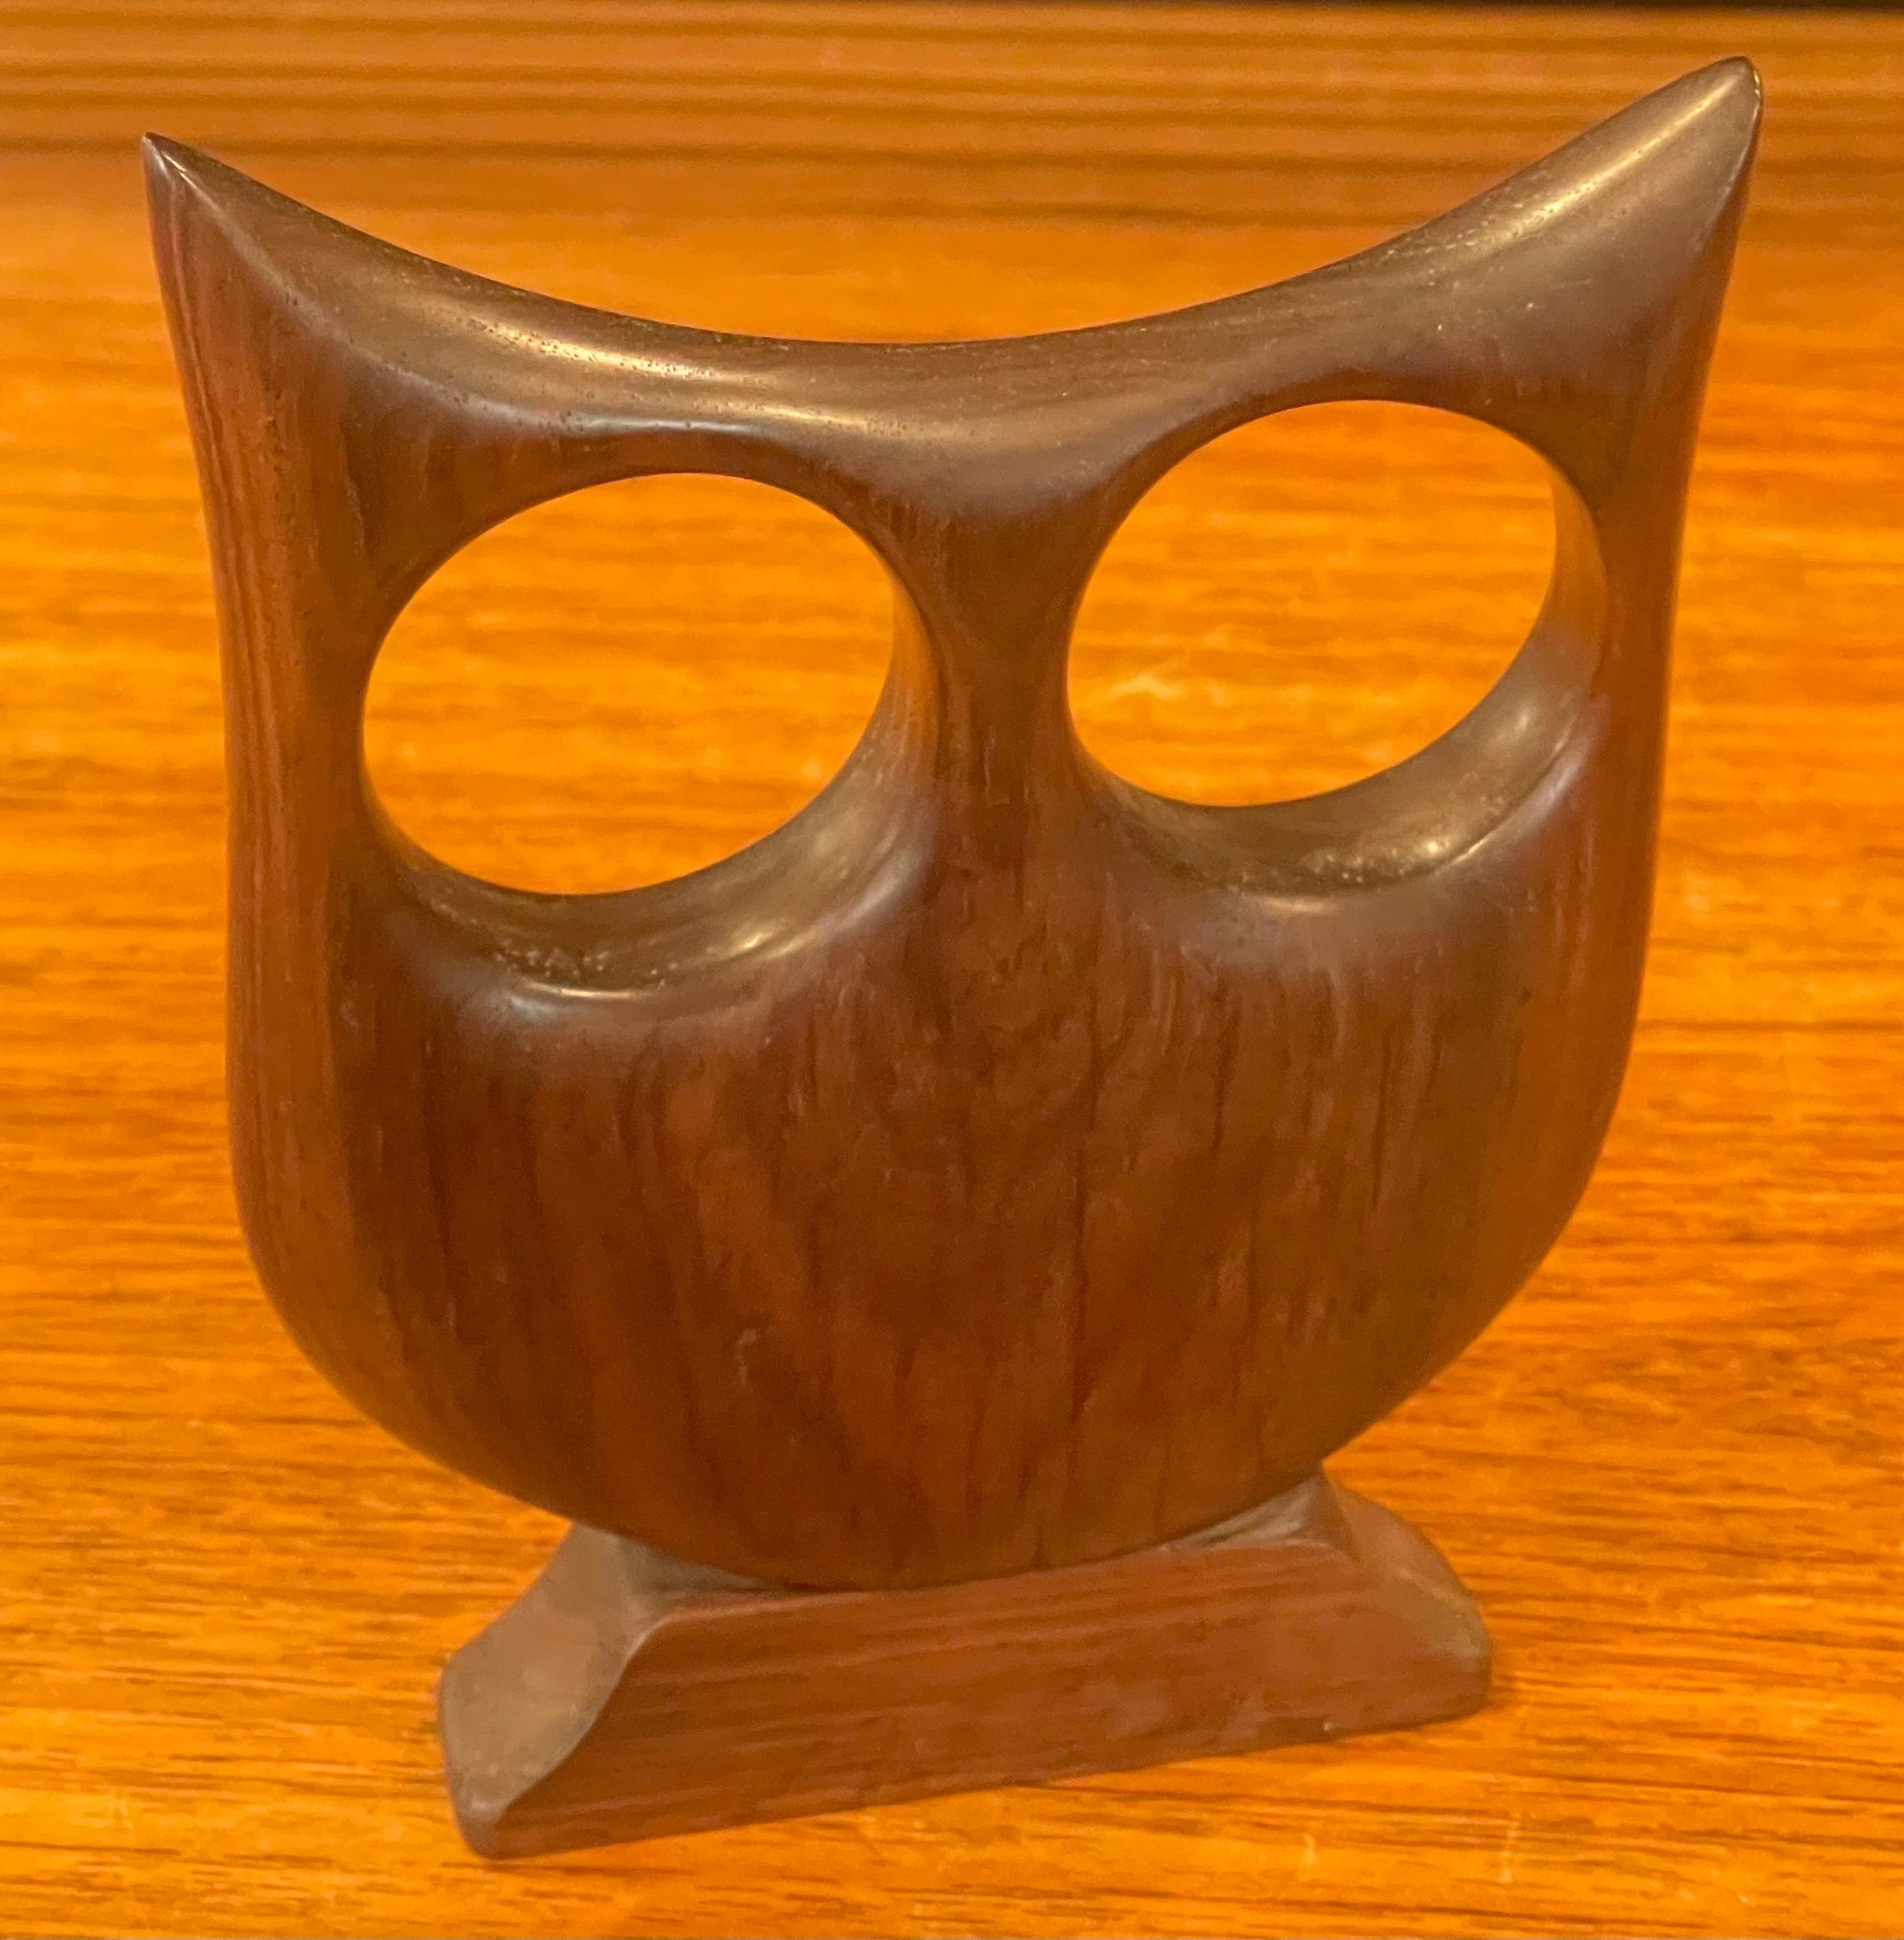 A very cool modernist rosewood owl sculpture, on base, circa 1950s. The piece is in very good vintage condition and measures 4.75